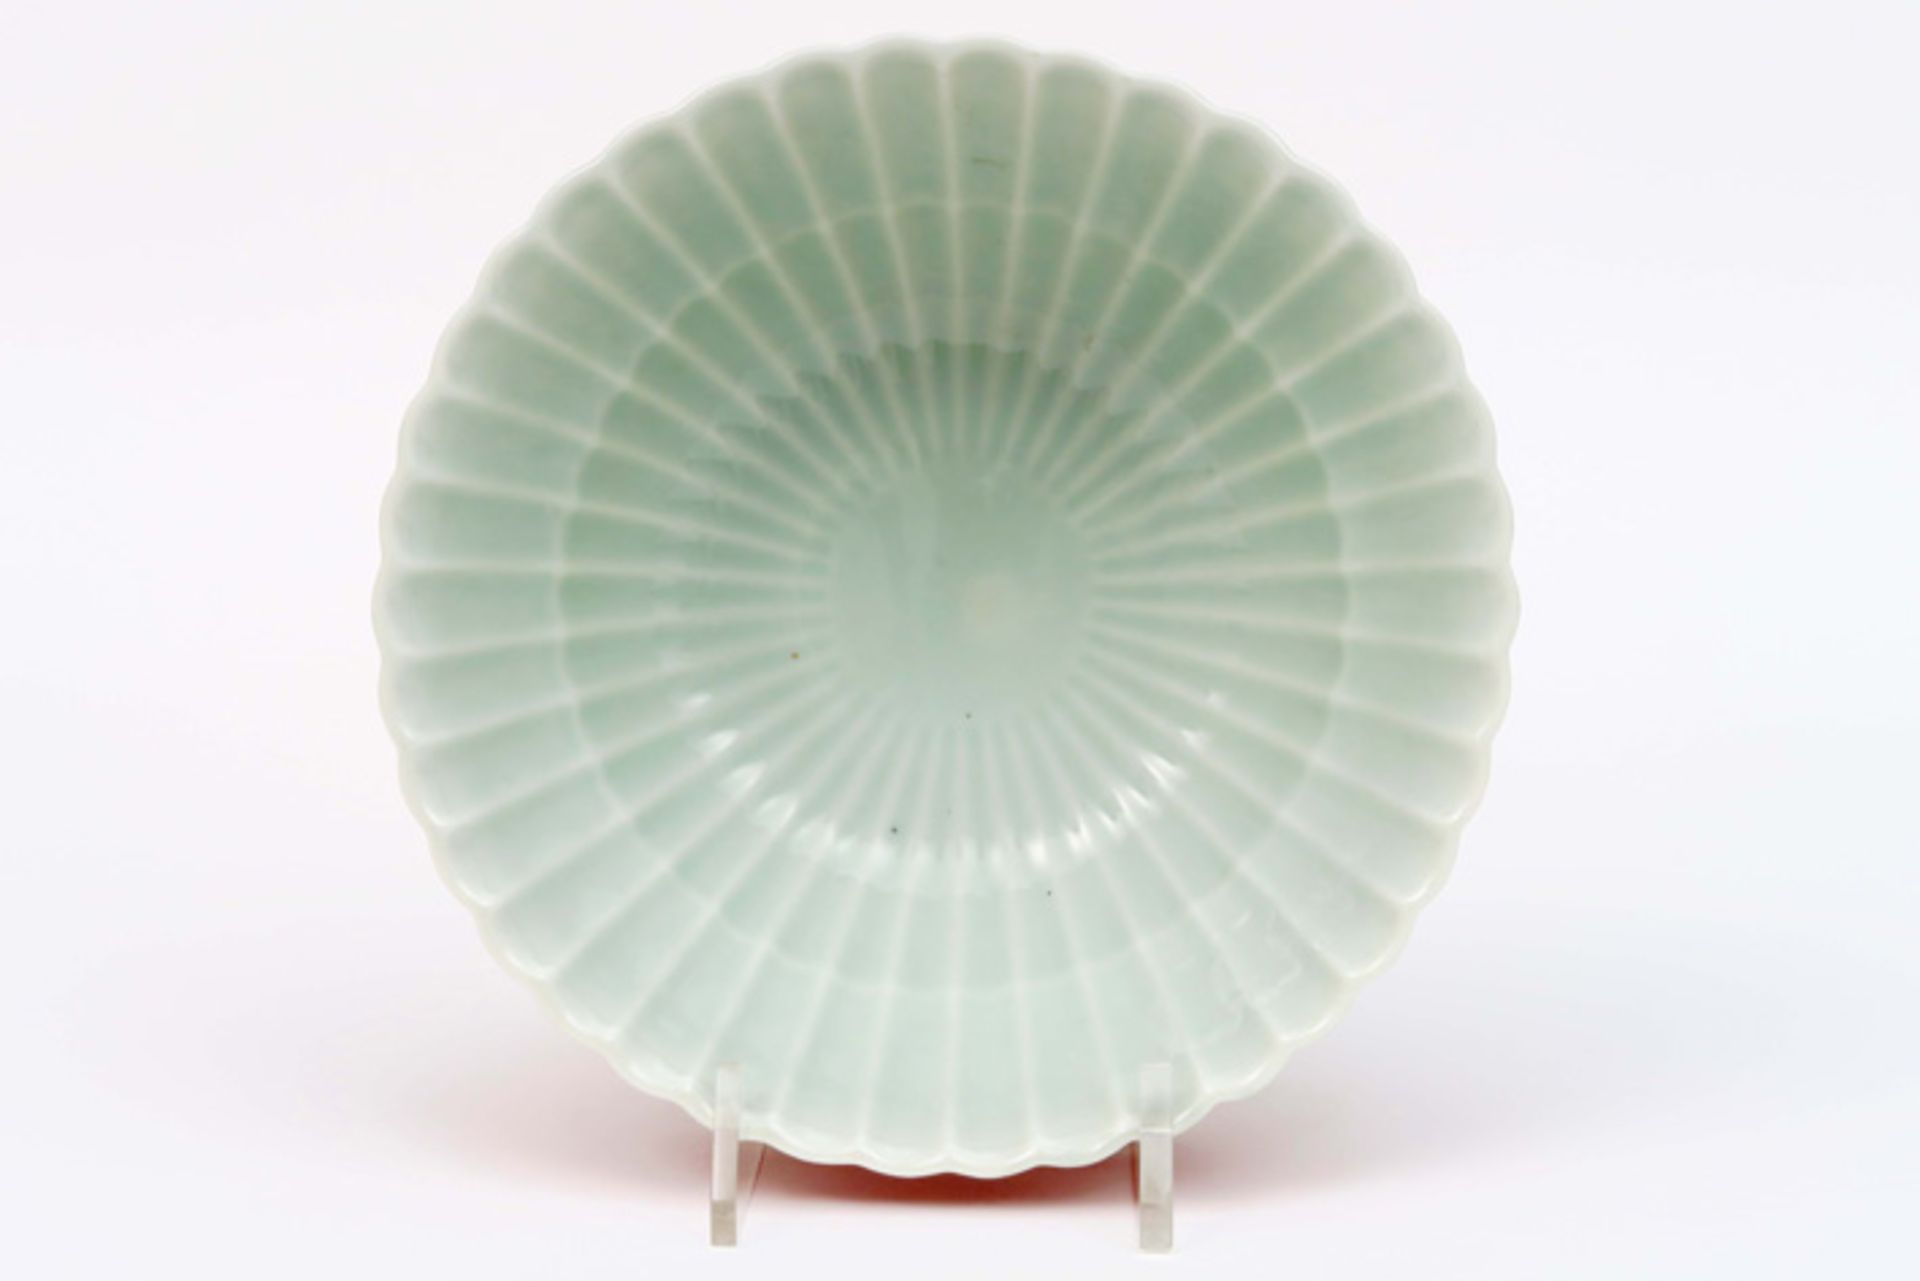 scalloped lotusflower shaped bowl in marked Royal Kopenhagen porcelain with embossed ribs||Bowl in - Image 3 of 5